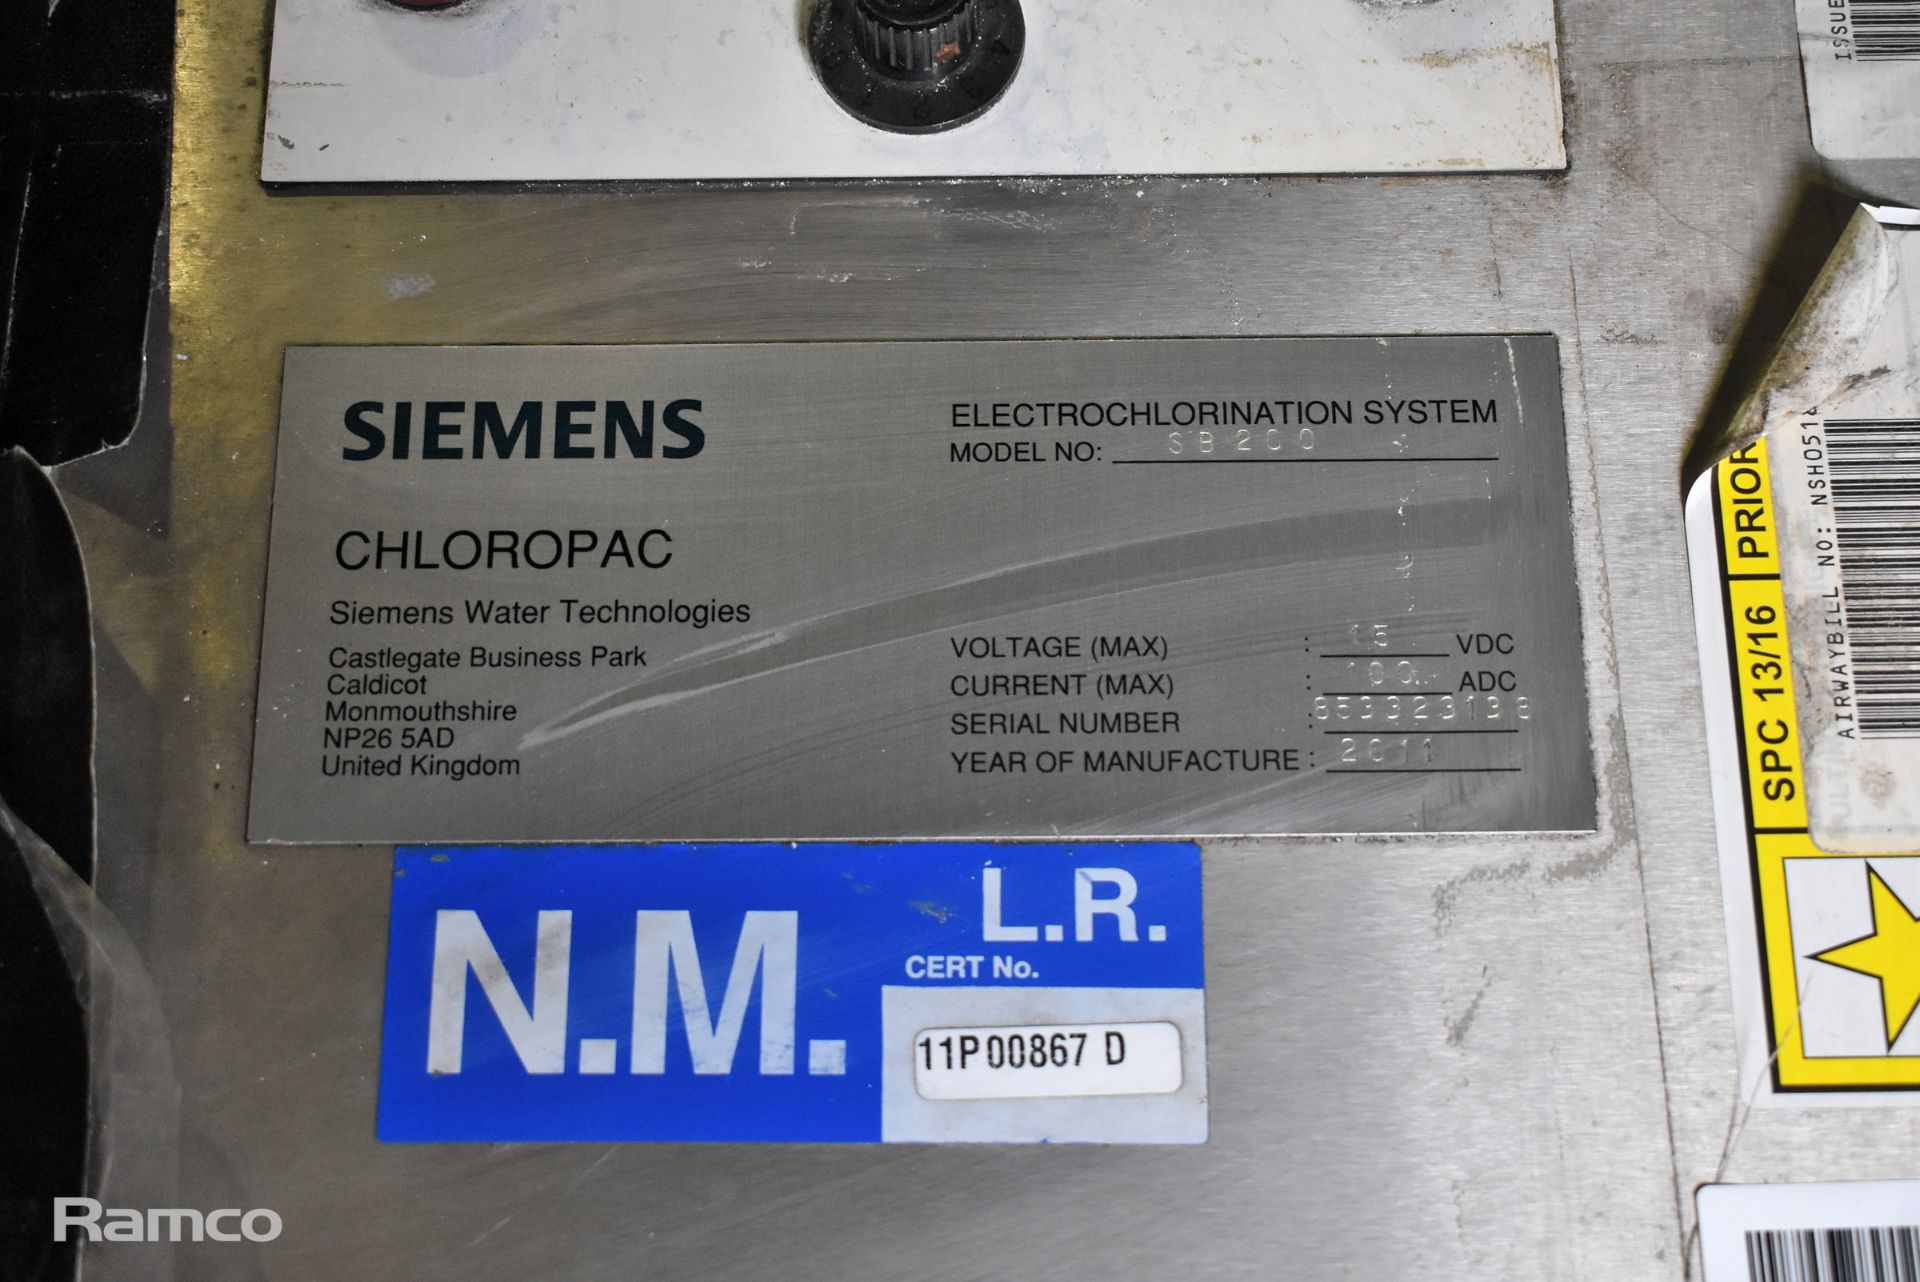 Siemens Chloropac SB200 stainless steel power supply unit - W 580 x D 450 x H 900mm - Image 5 of 9